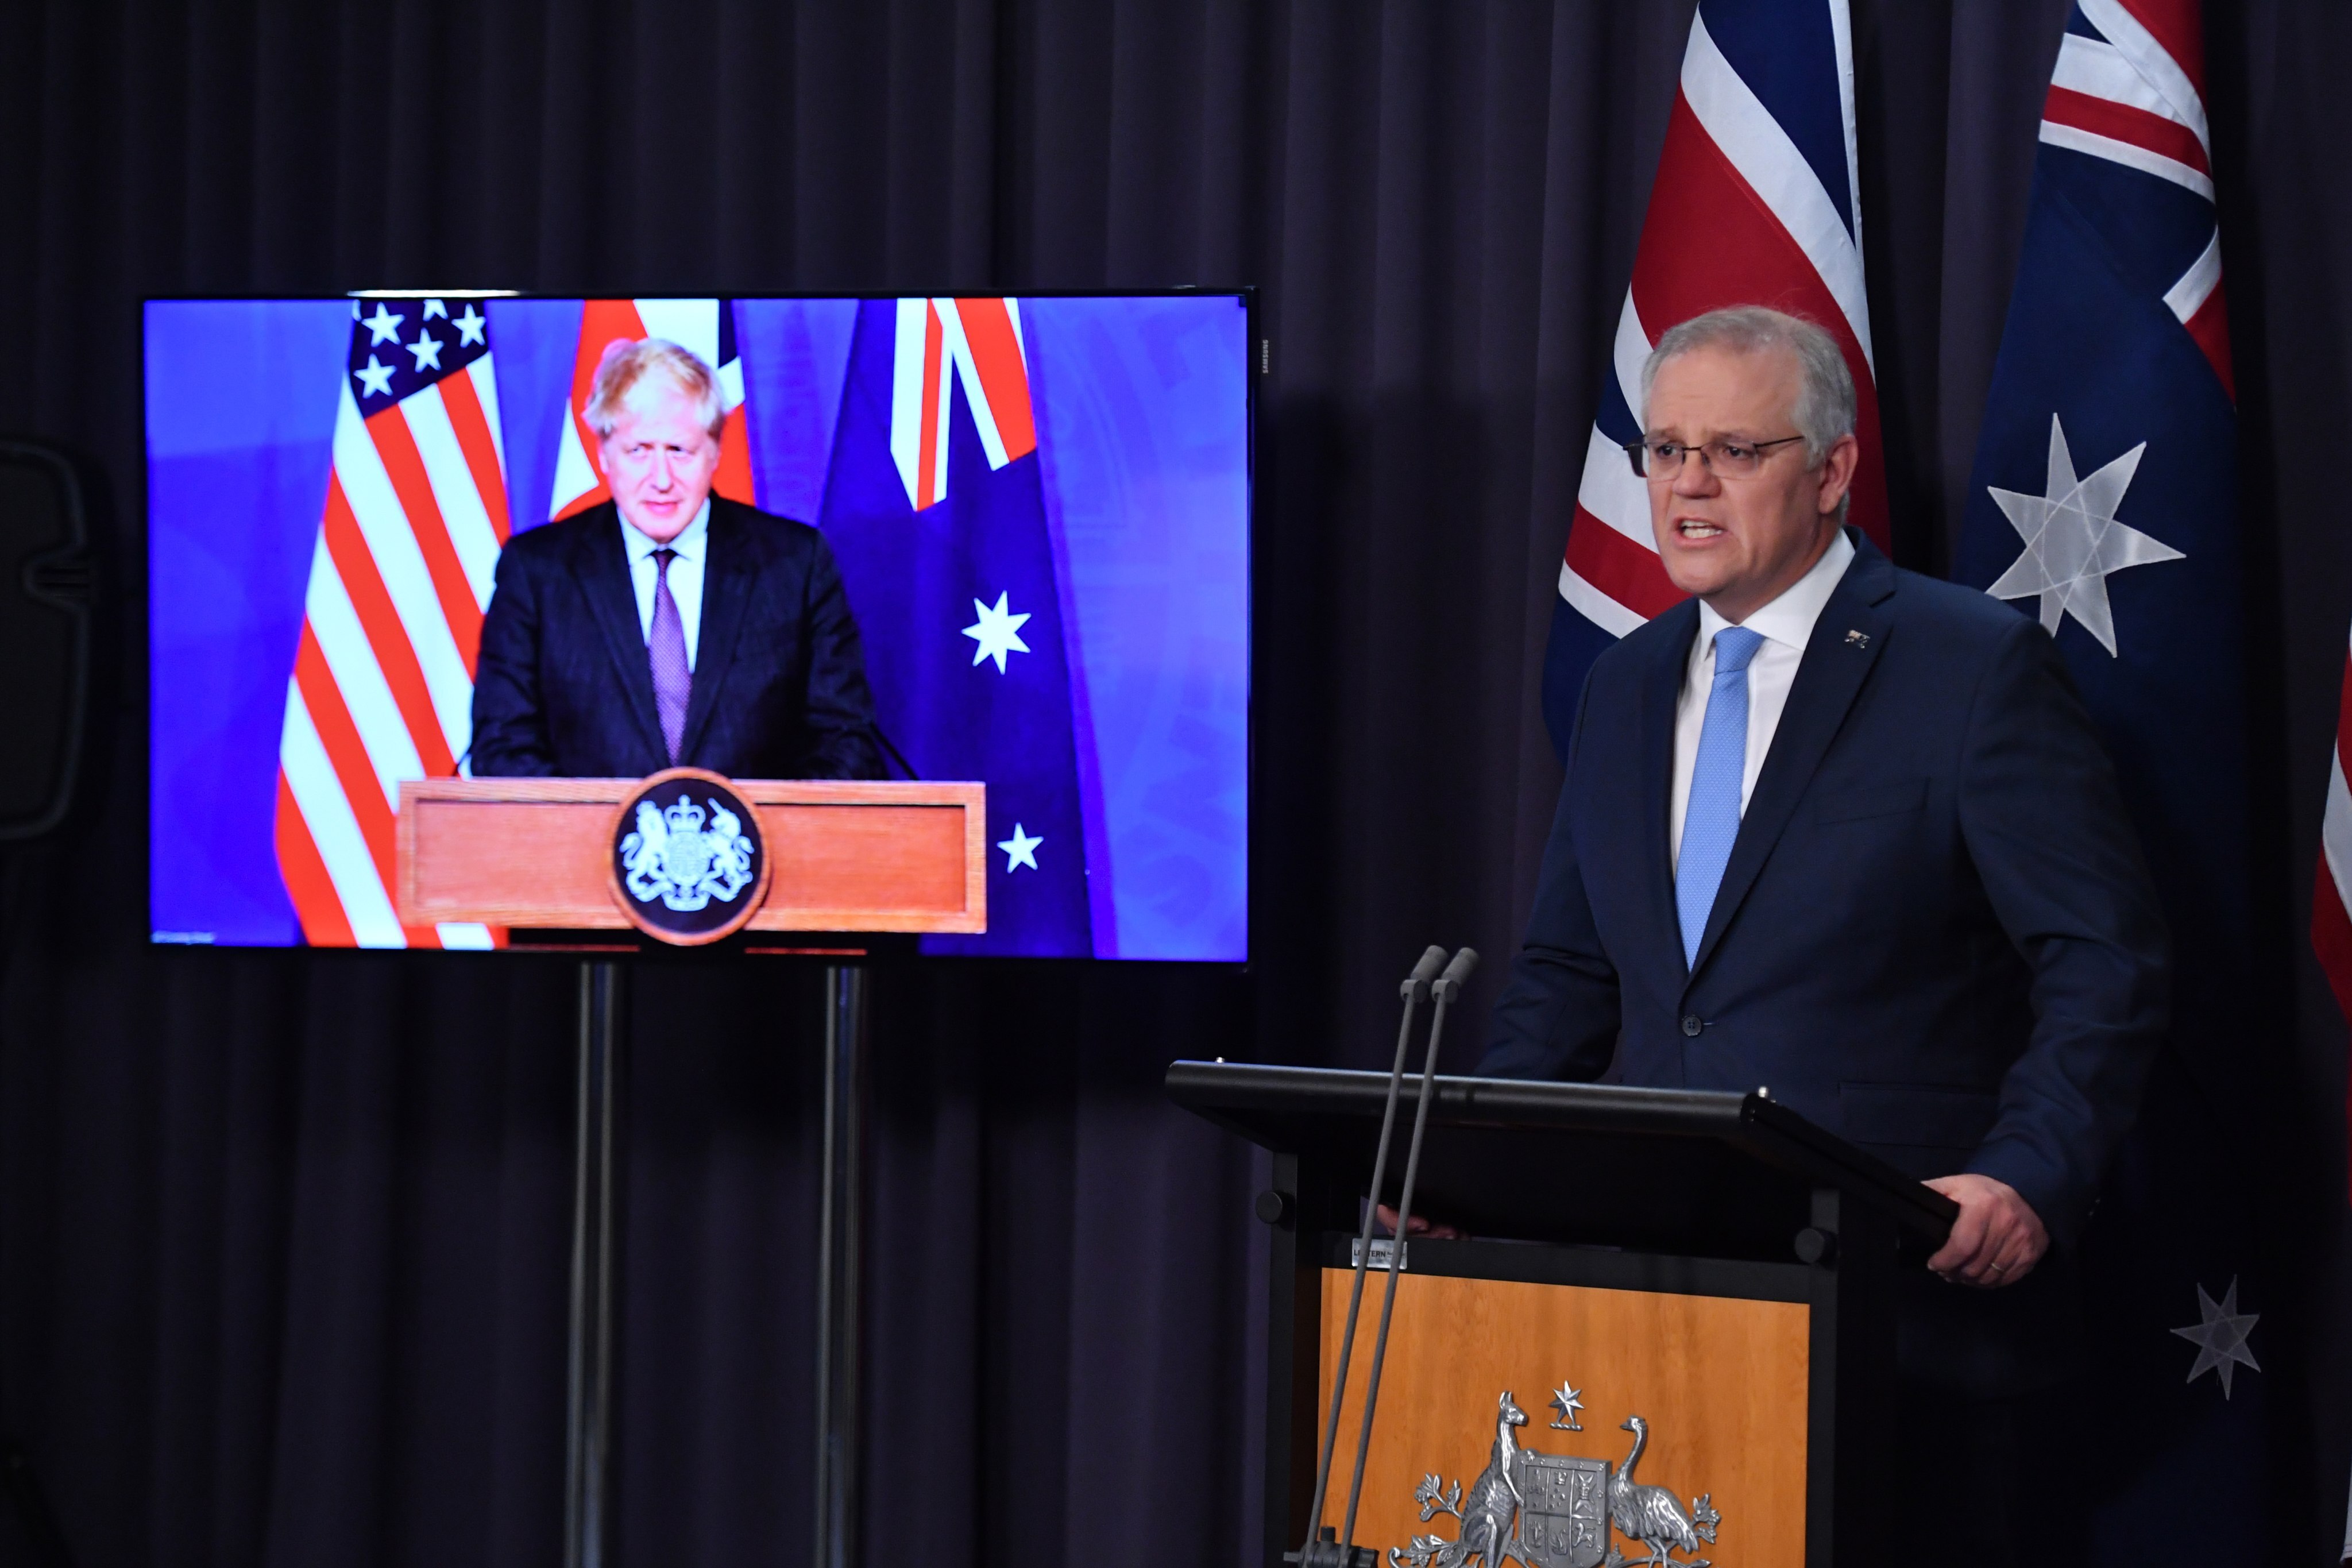 Australian Prime Minister Scott Morrison (right) attends a joint press conference on the Aukus security partnership via video link with British Prime Minister Boris Johnson (left) and US President Joe Biden, from Parliament House in Canberra on September 16. Photo: EPA-EFE 